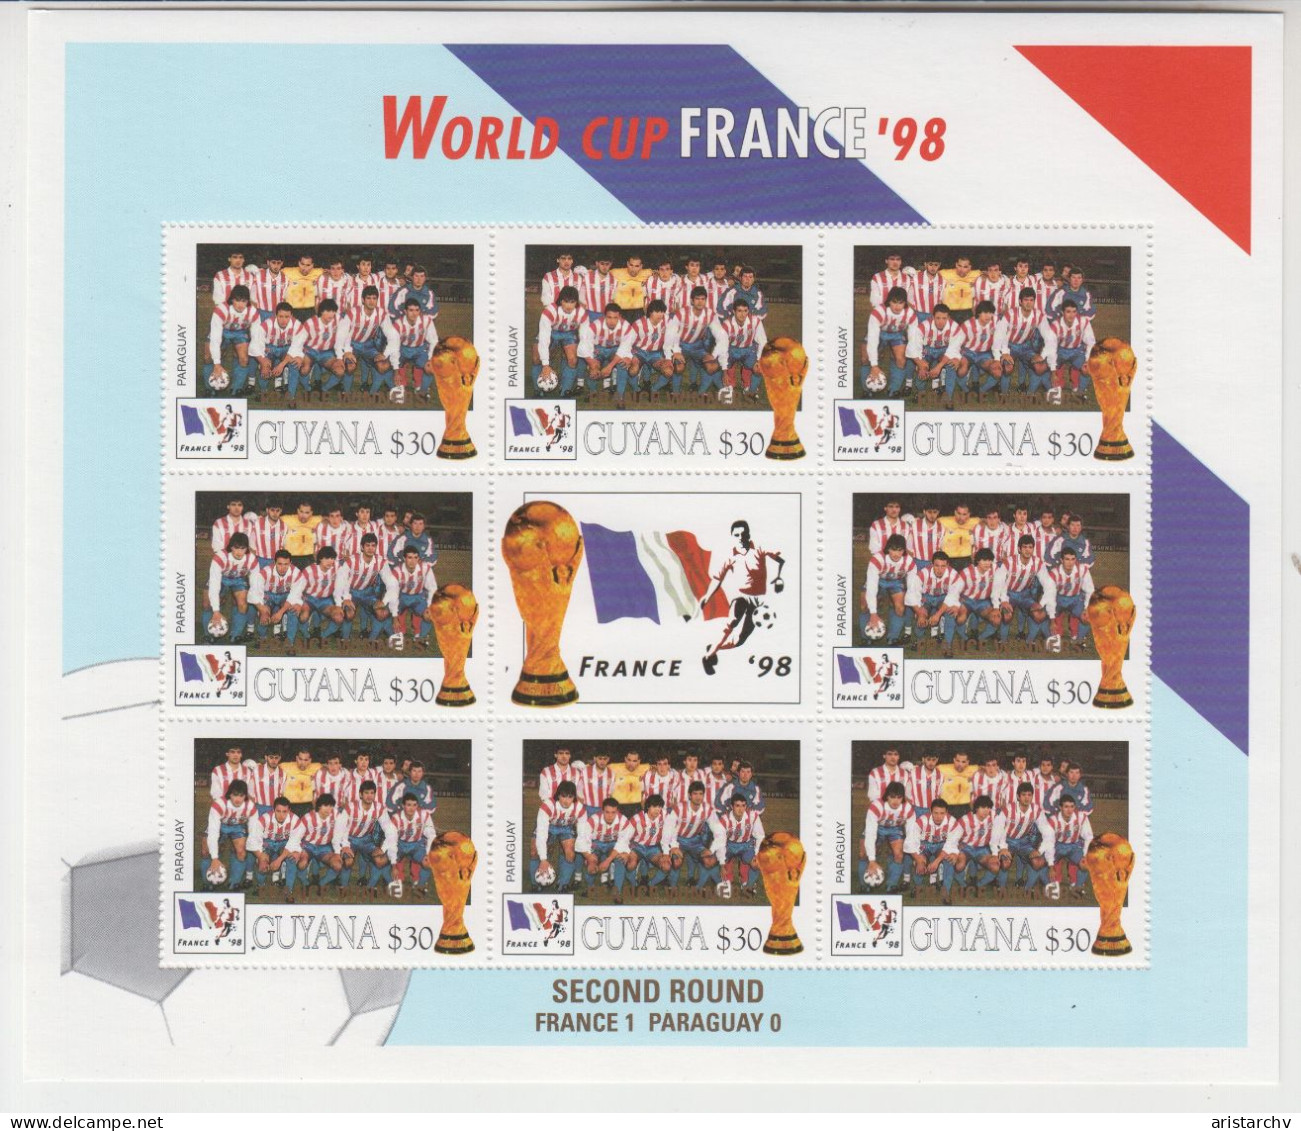 GUYANA 1998 FOOTBALL WORLD CUP 8 STAMPS AND 8 SHEETLETS OVERPRINT